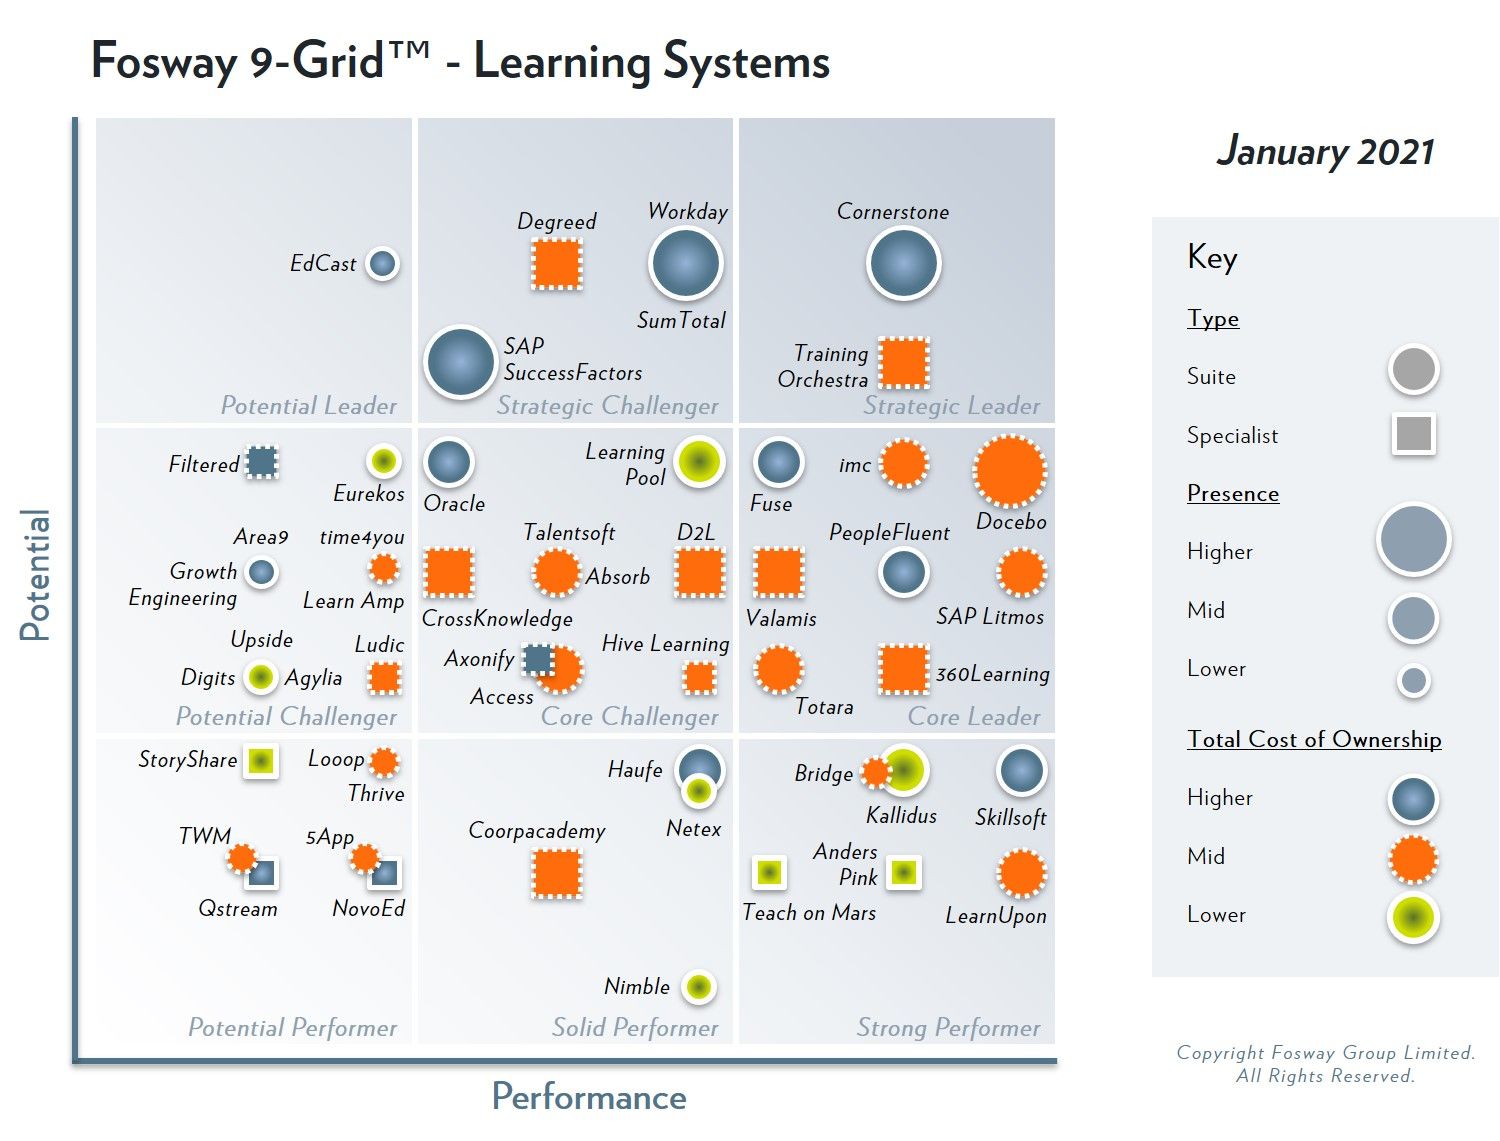 The 2021 Fosway 9-Grid™ for Learning Systems recognizes PeopleFluent as a Core Leader